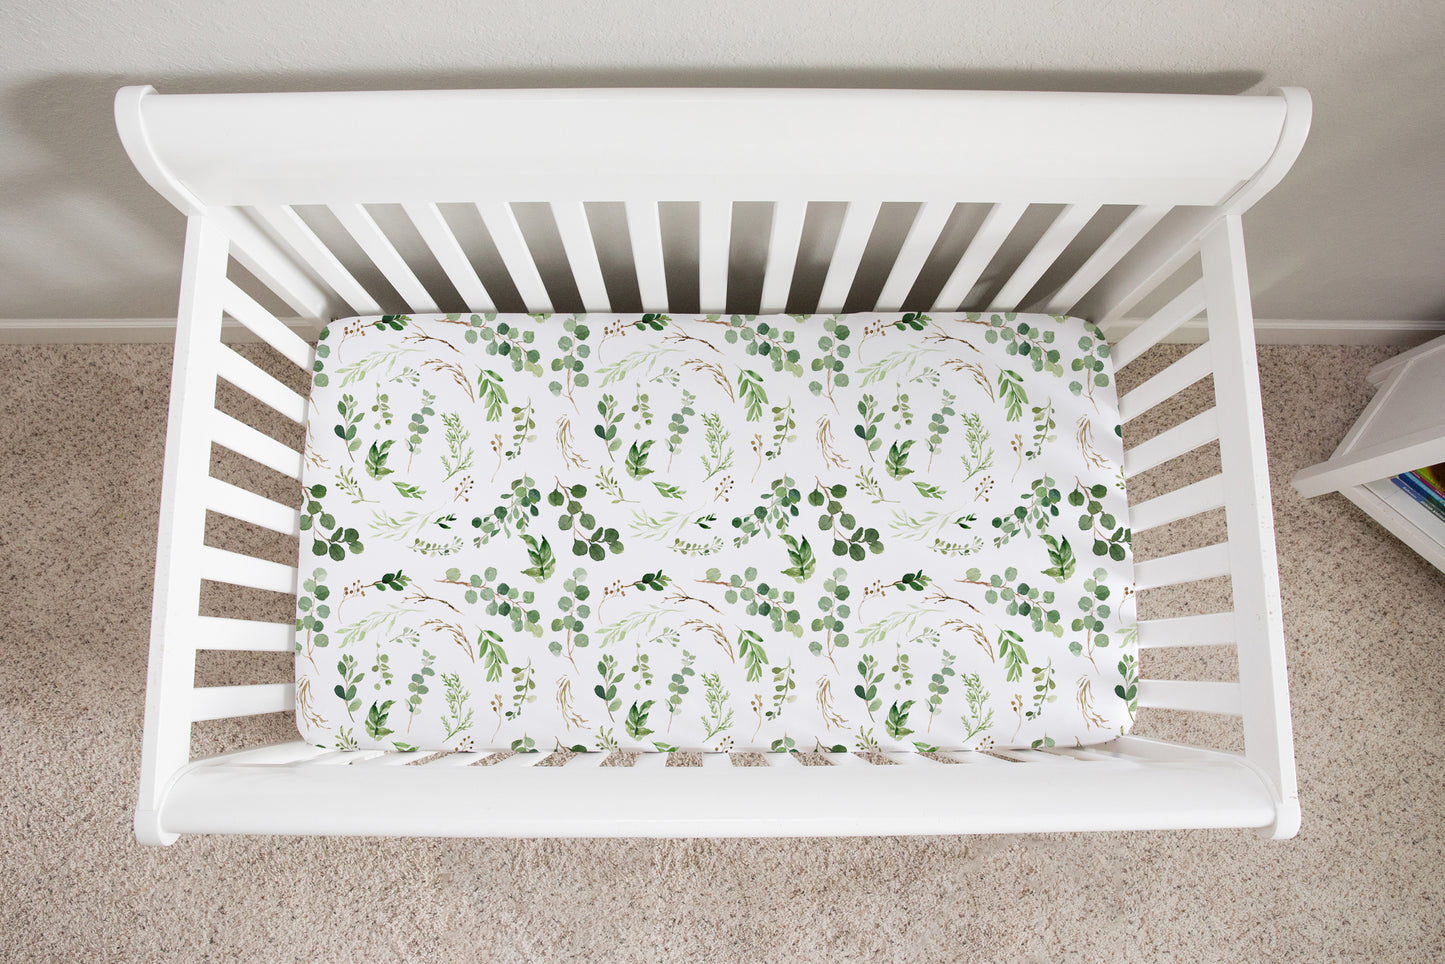 Greenery Collection Patterned Crib Sheet